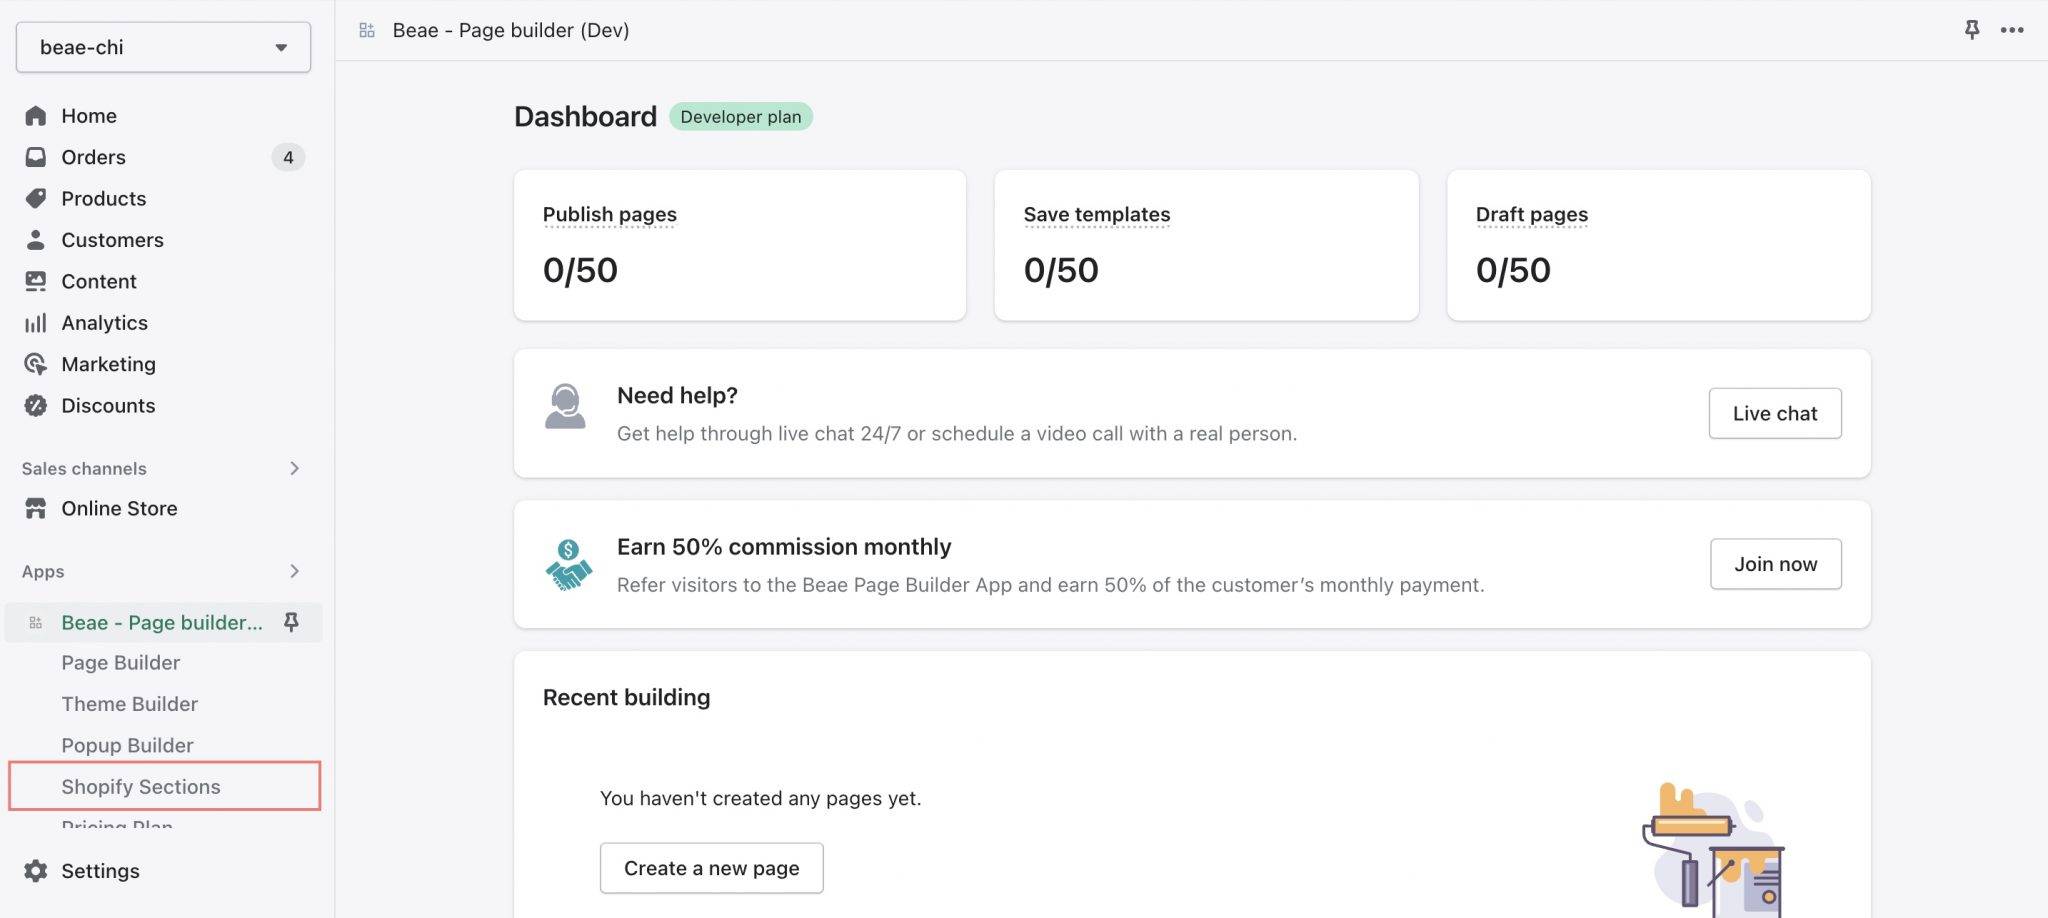 Shopify sections in Beae updates